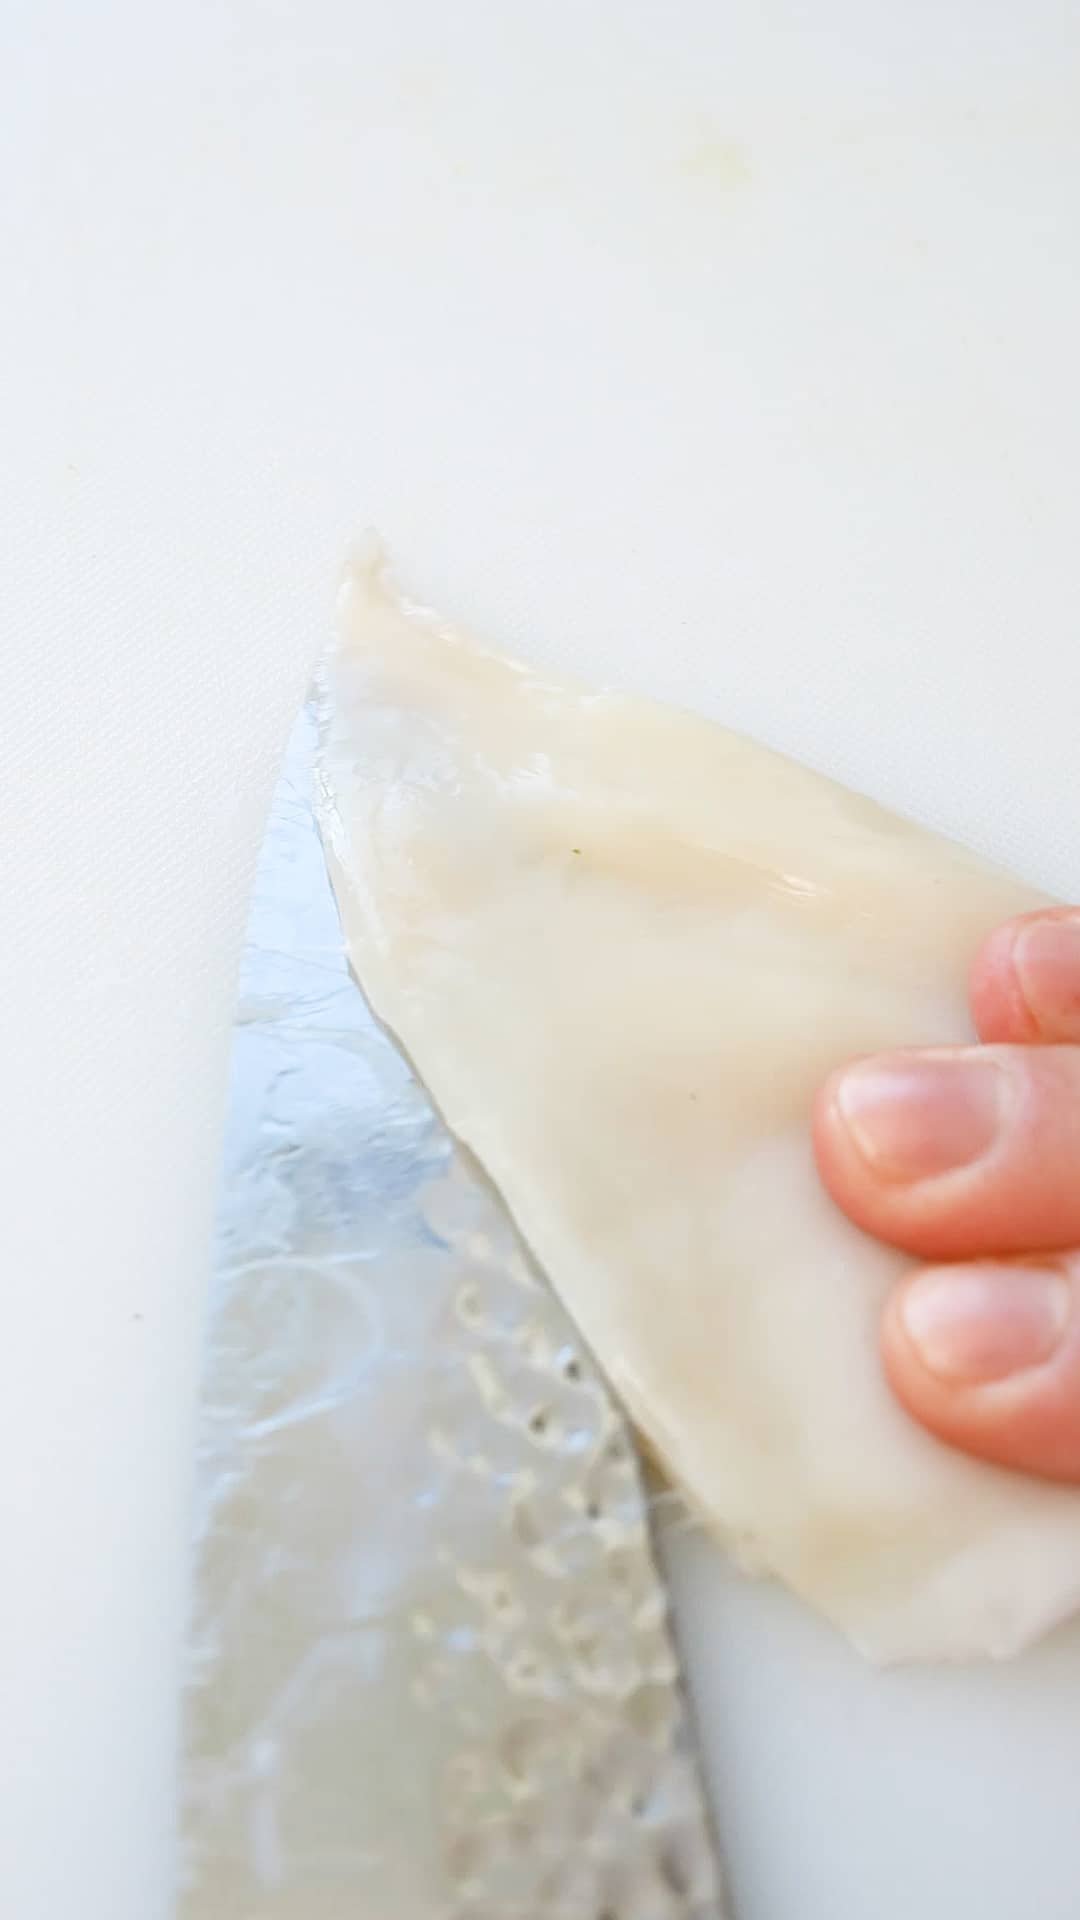 A fresh squid tube being cut in half with a knife.